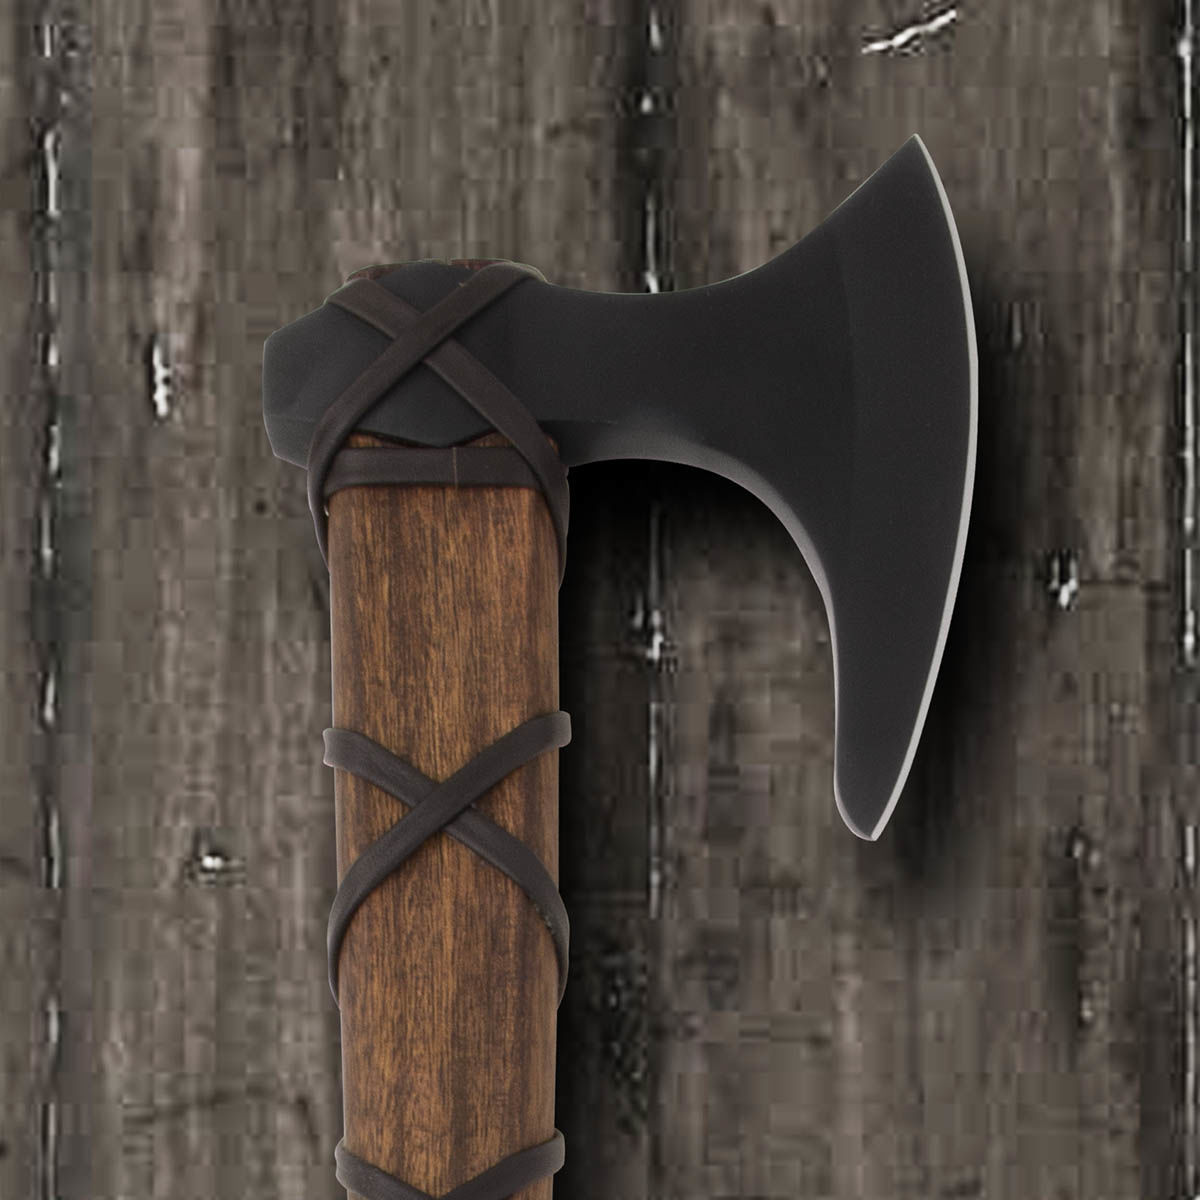 Ragnar's Axe with stained ash handle and 2Cr13 stainless steel head